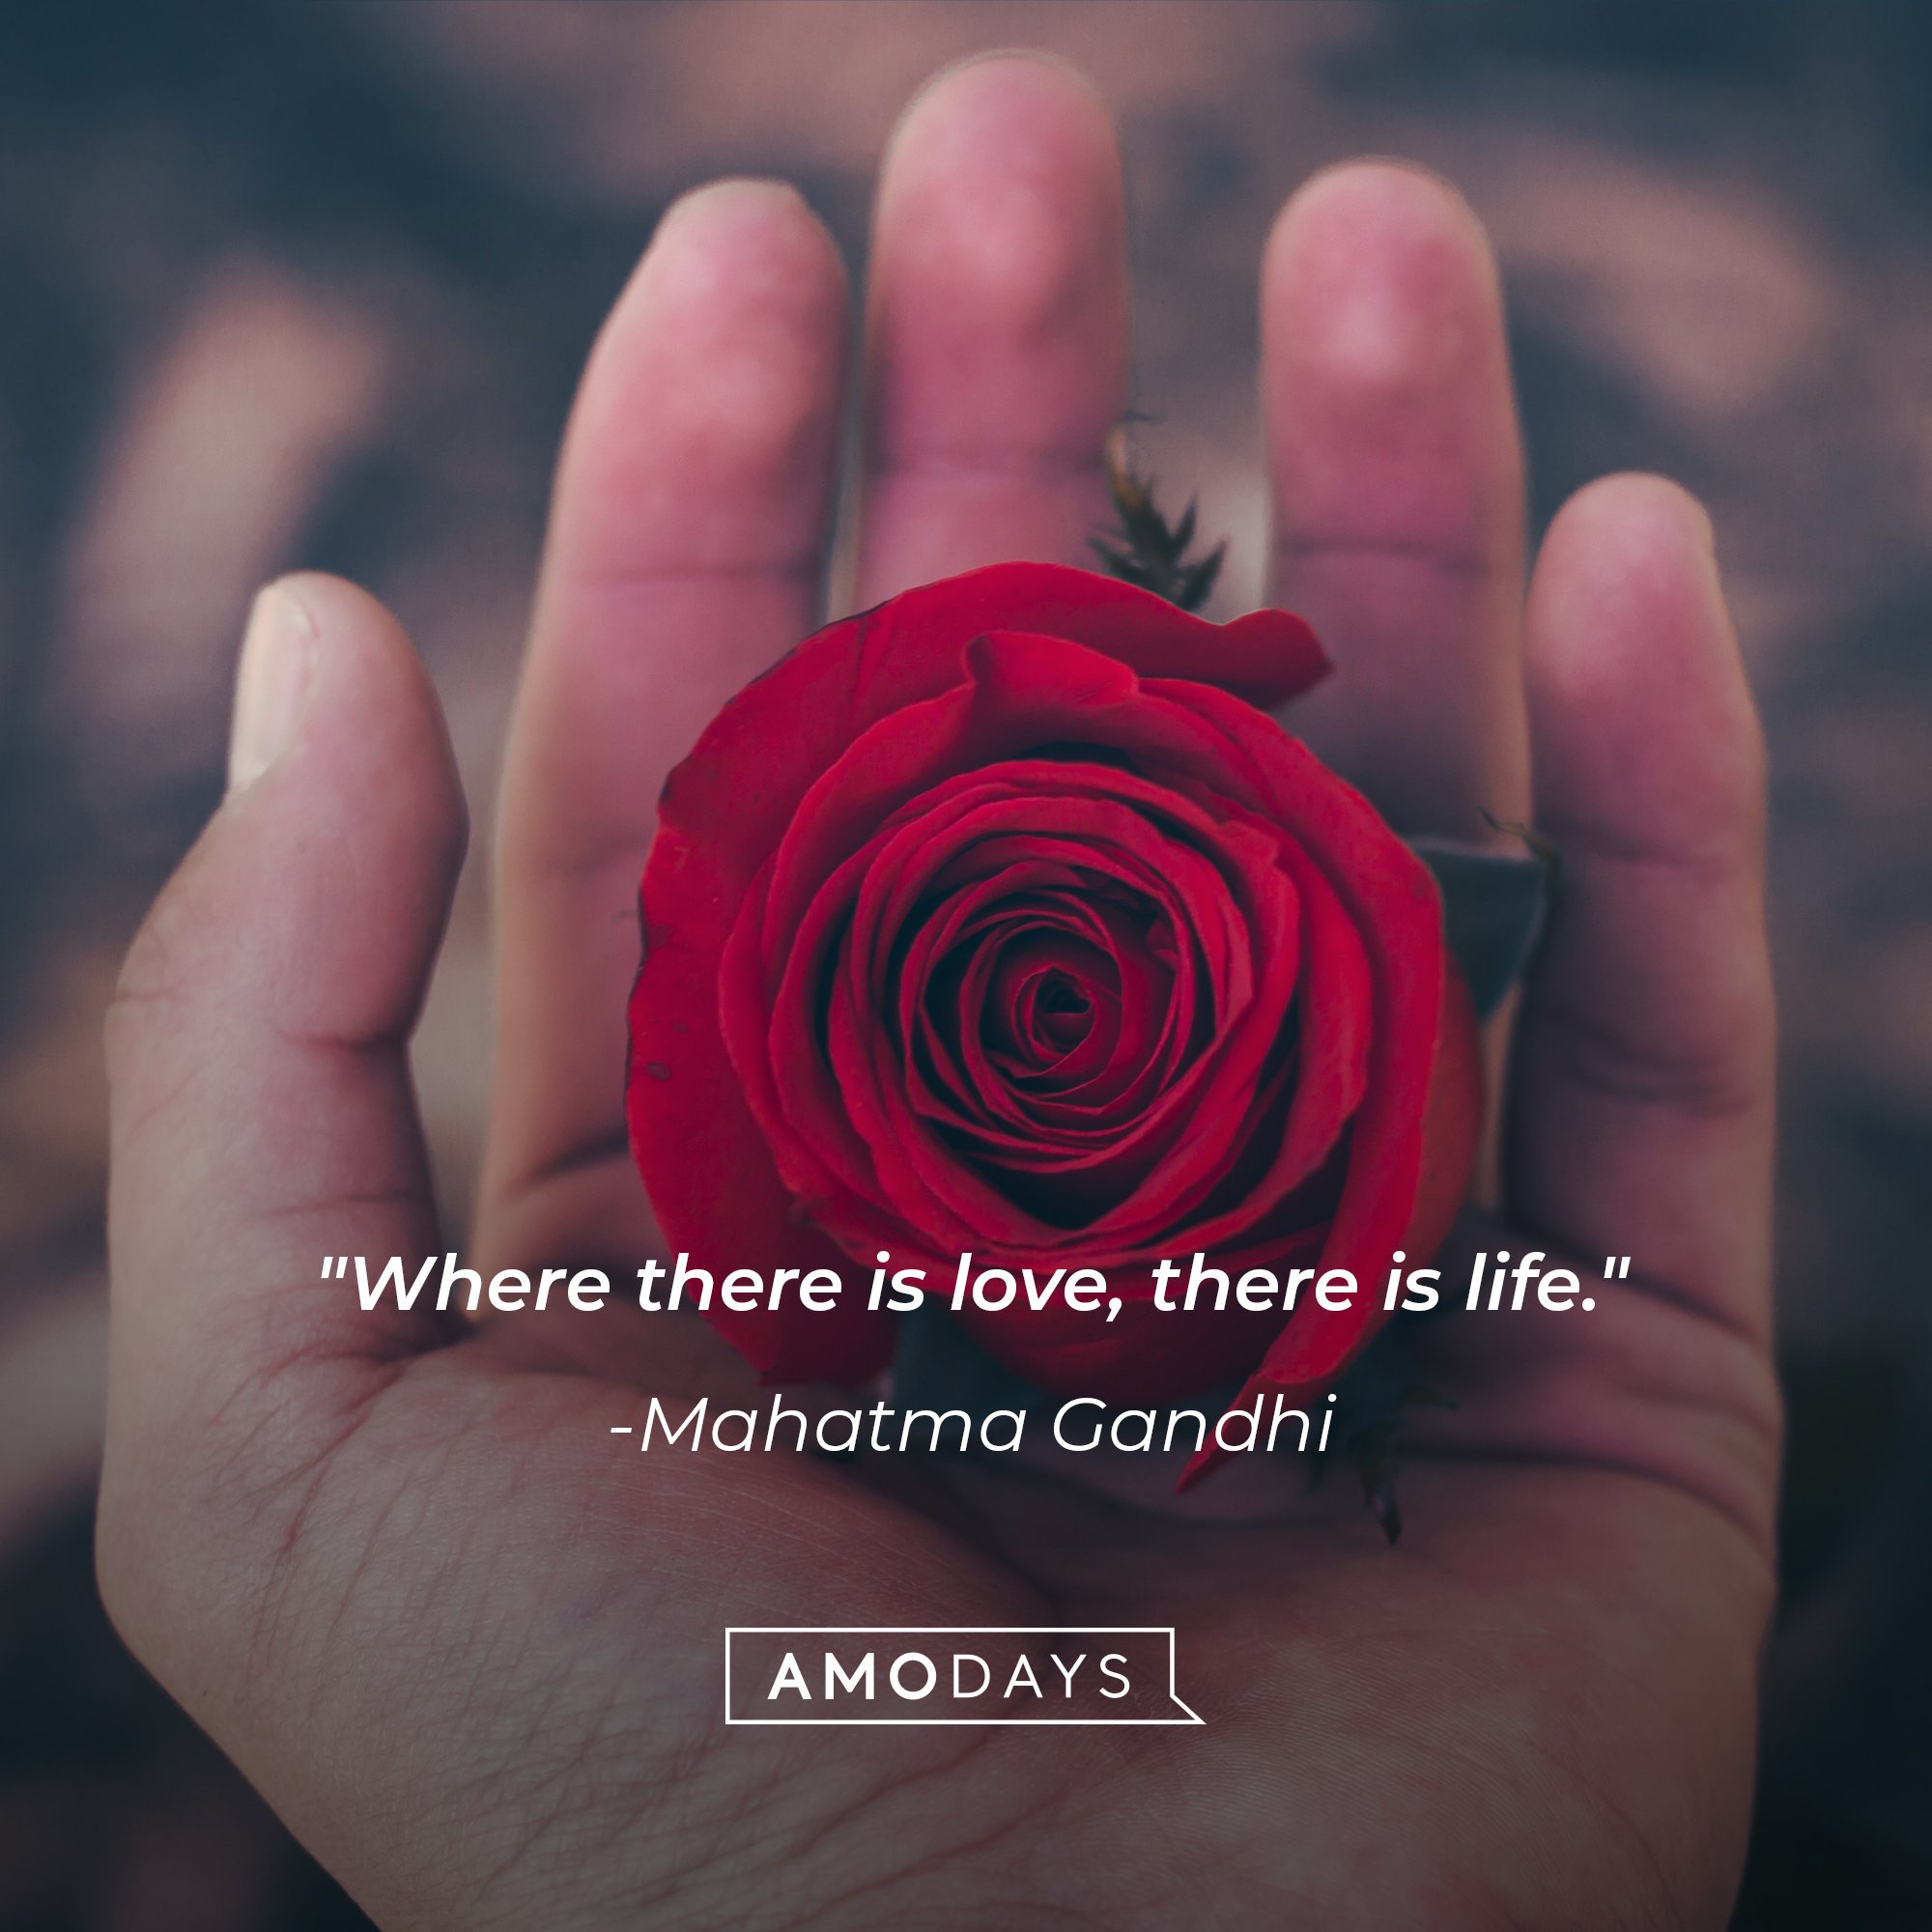 Mahatma Gandhi’s quote: "Where there is love, there is life." | Image: AmoDays